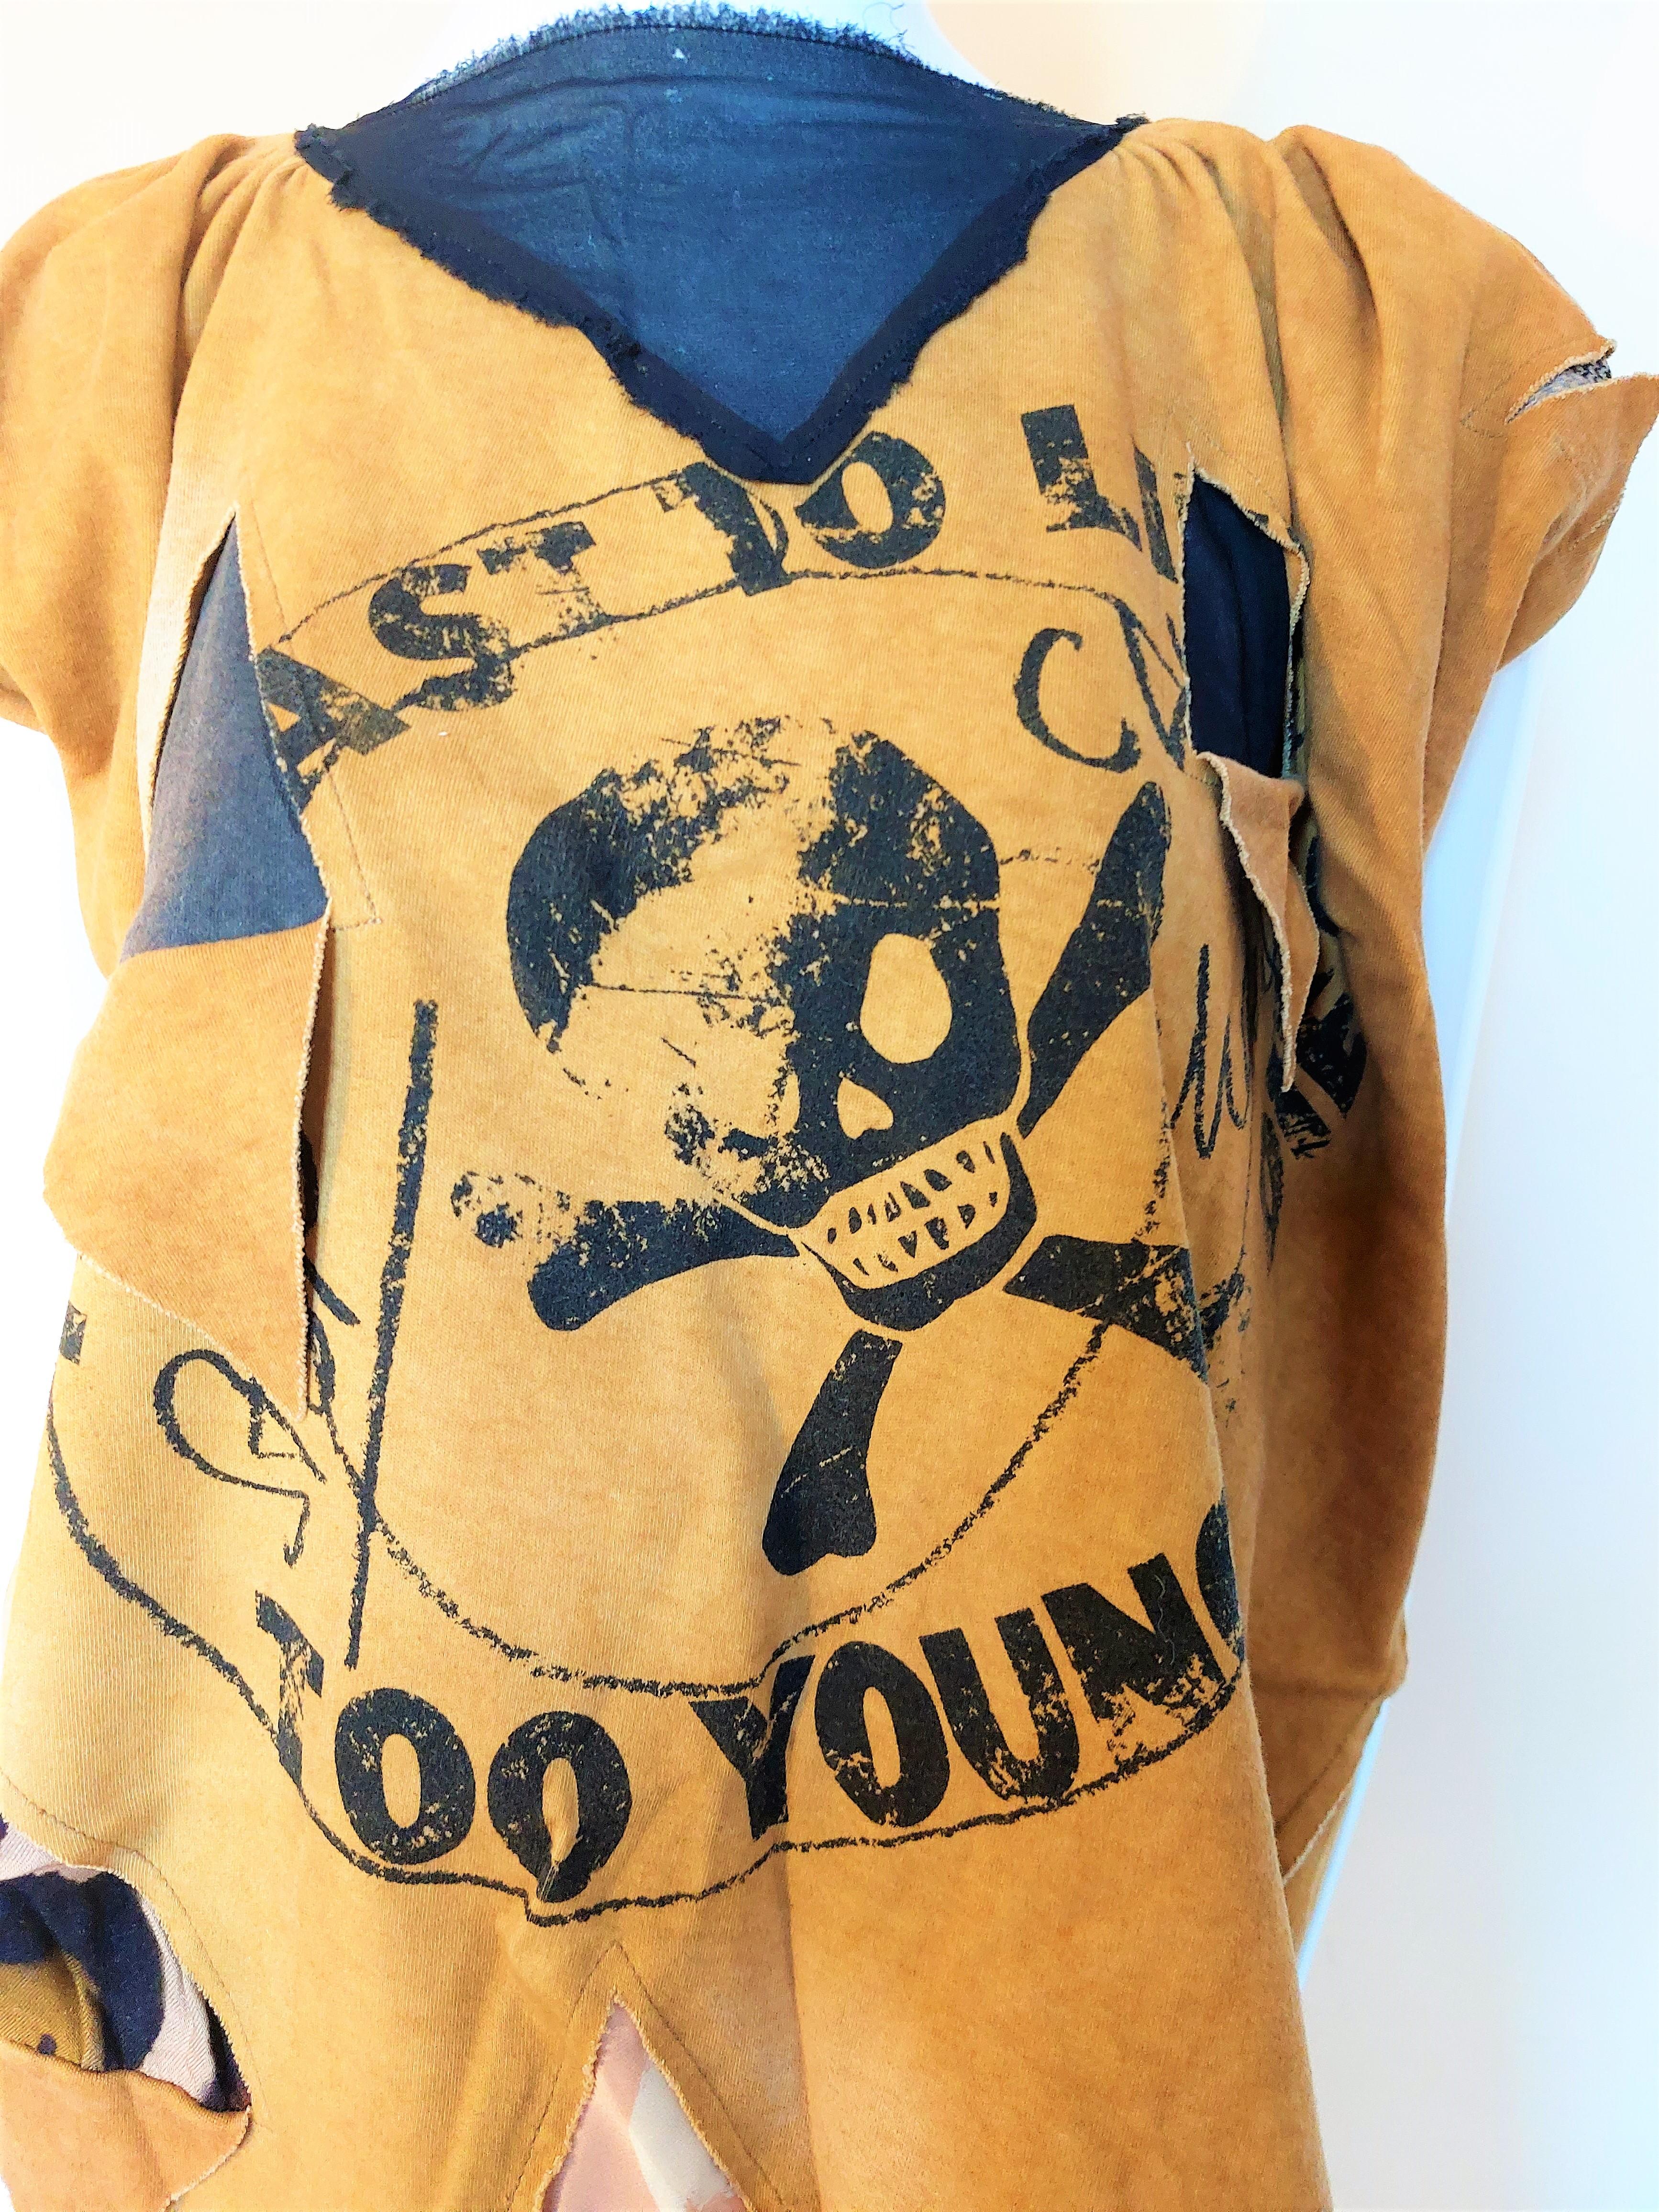 Vivienne Westwood Skull ’Too fast To Live Too Young to Die’ Punk Rock Dress Top 3